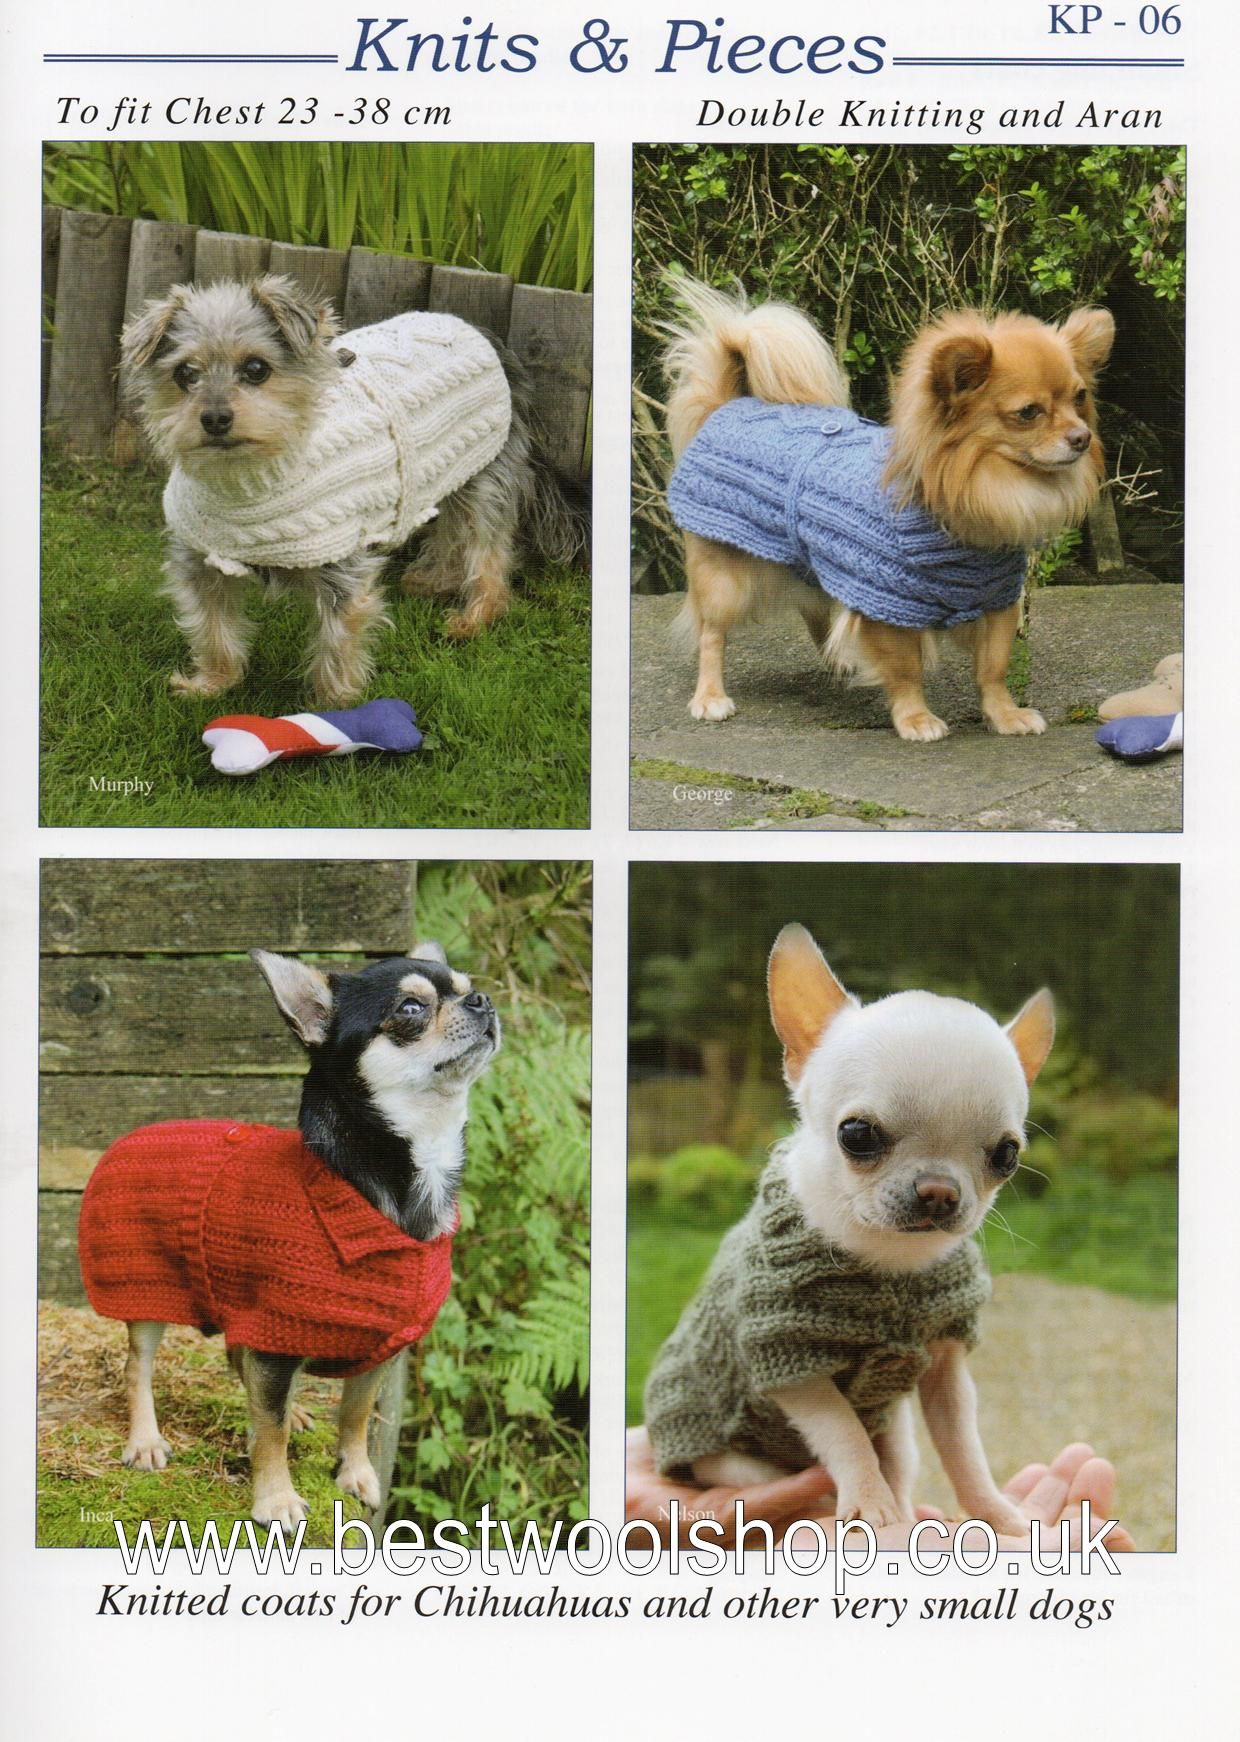 Knitted Dog Coat Pattern Kp 06 Knits Pieces Dog Coat Knitting Pattern Sandra Polley